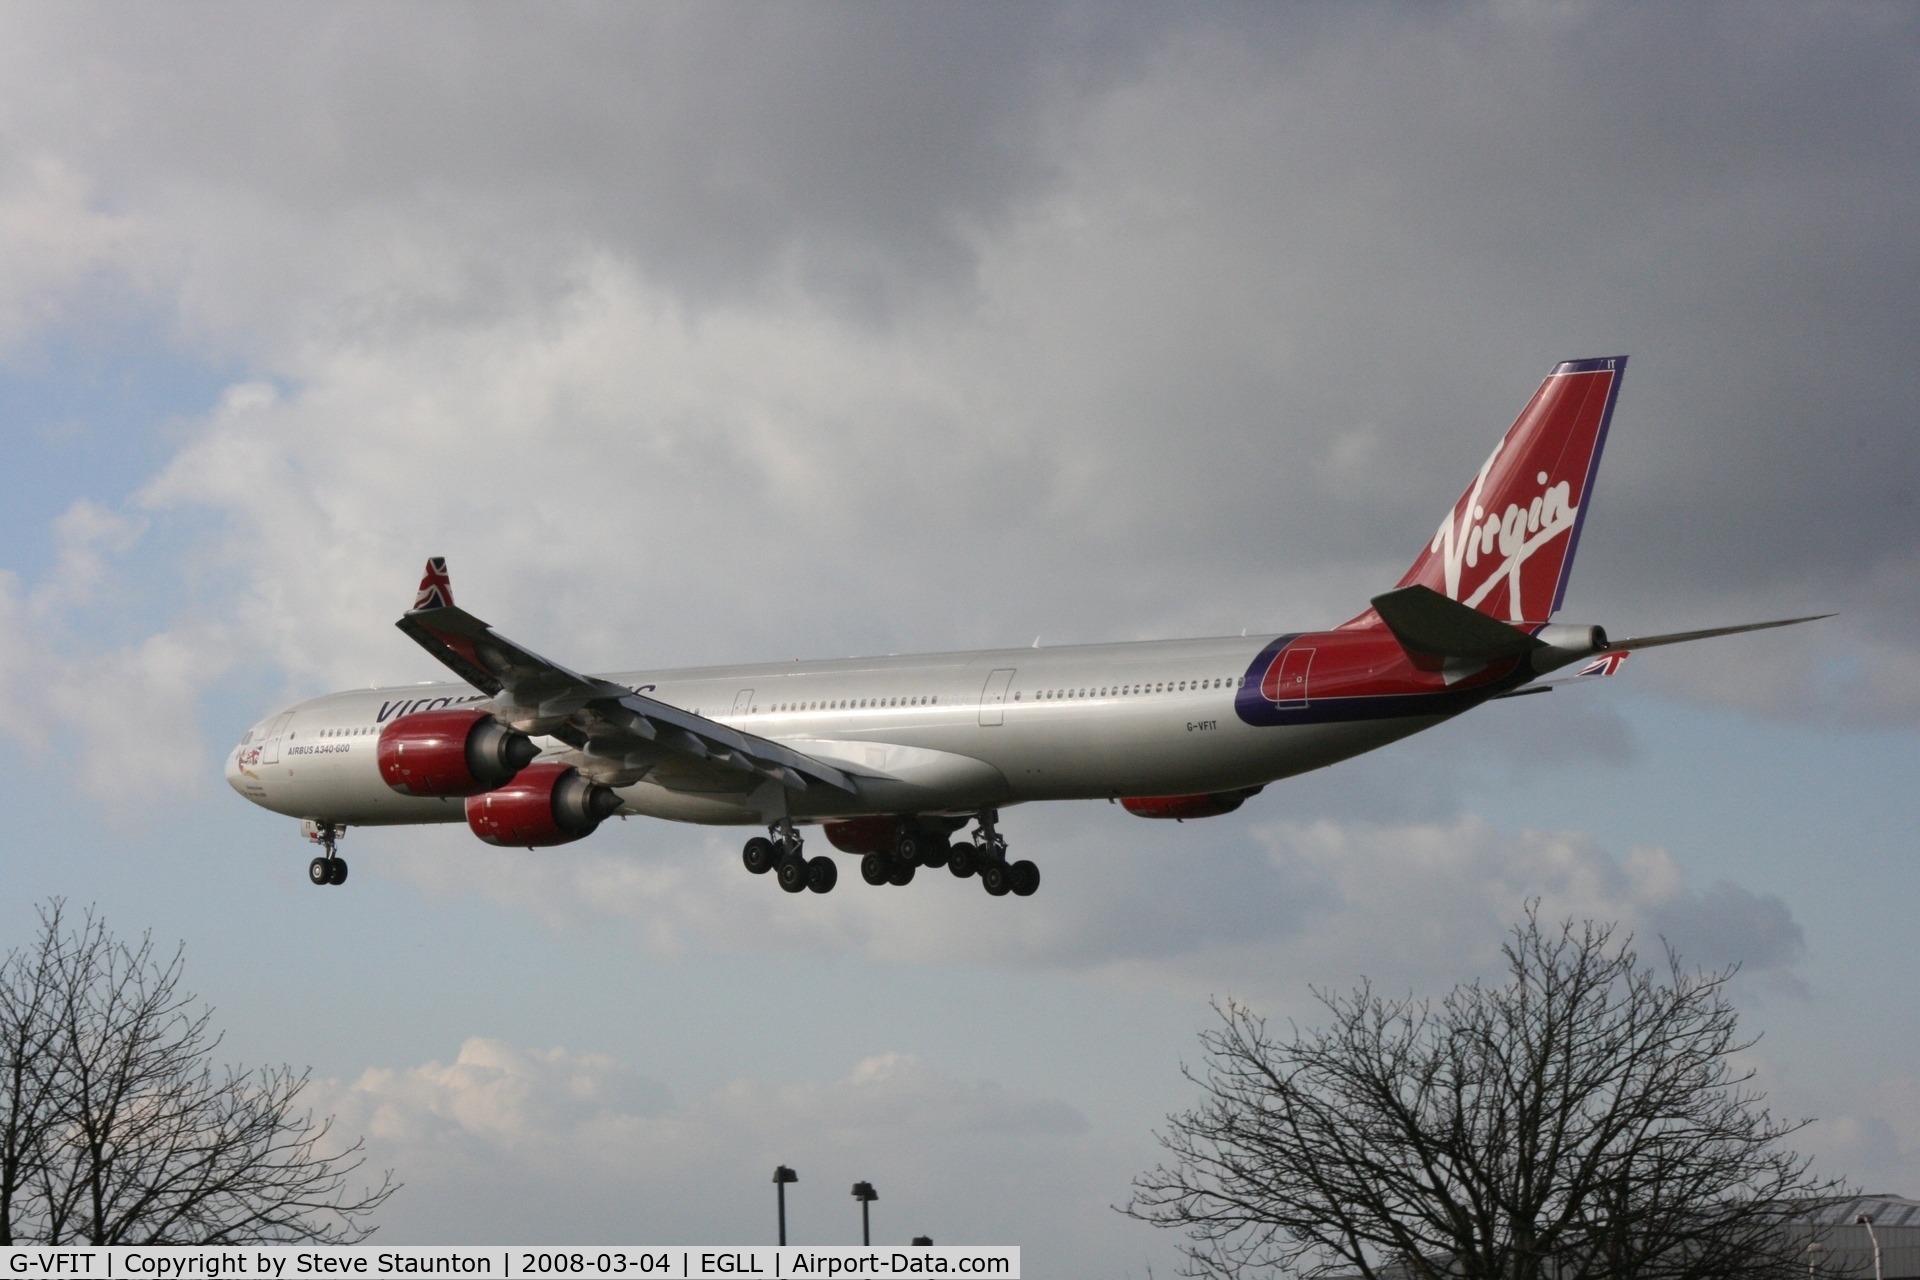 G-VFIT, 2006 Airbus A340-642 C/N 753, Taken at Heathrow Airport March 2008